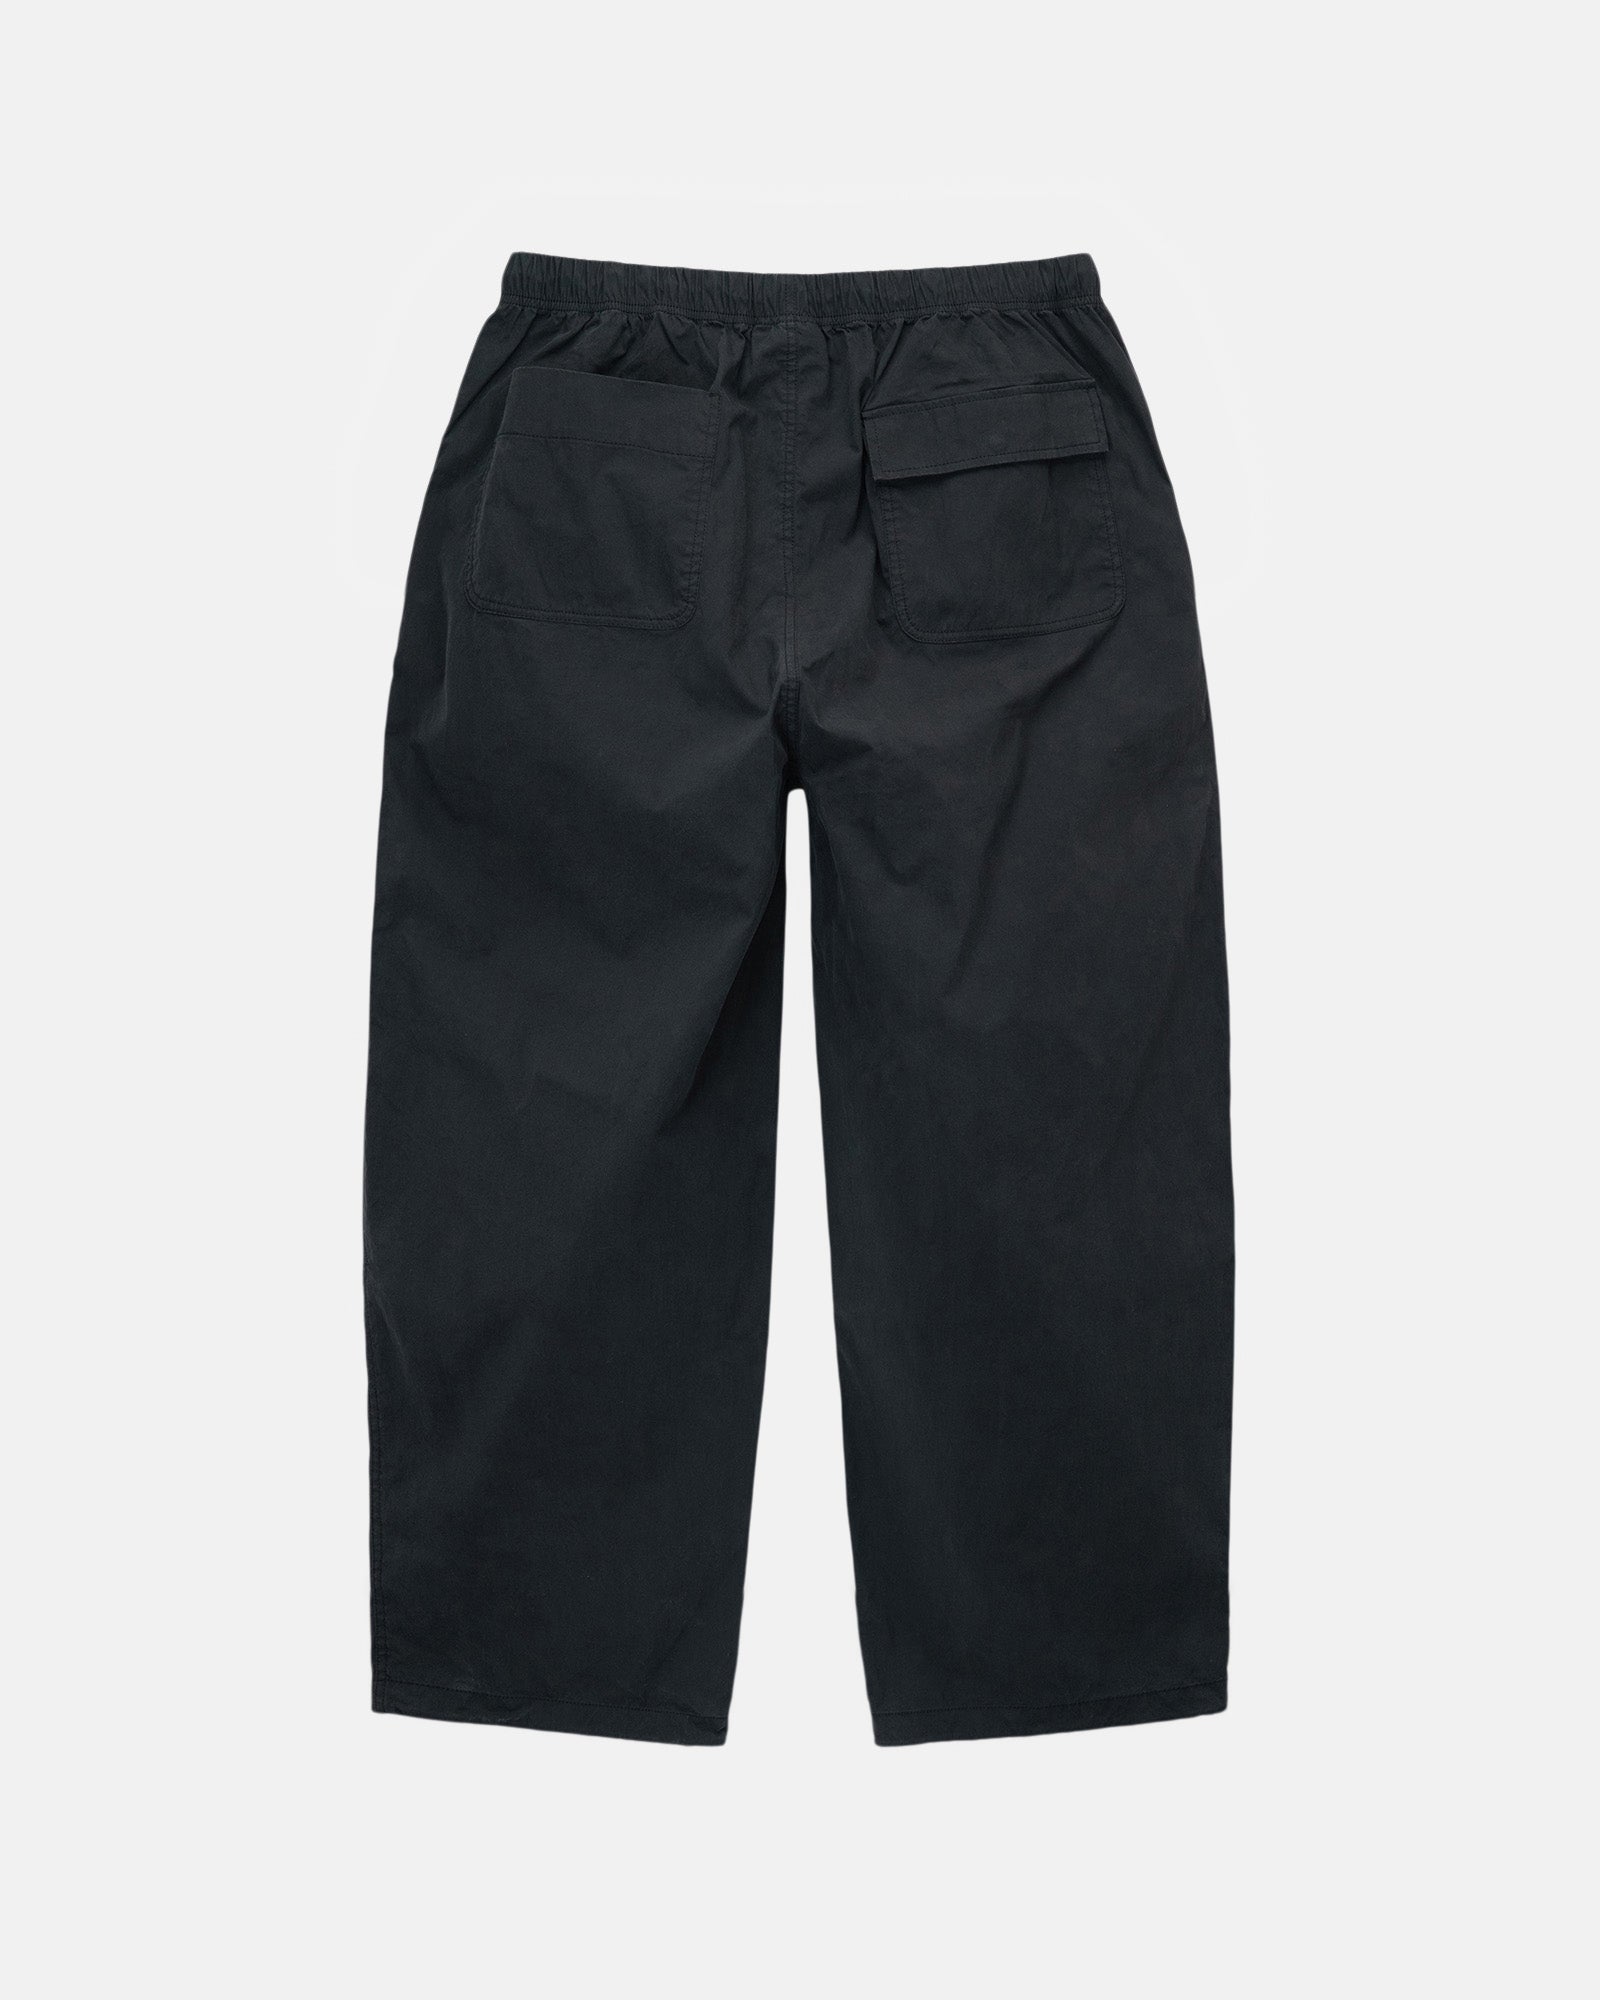 NYCO OVER TROUSERS